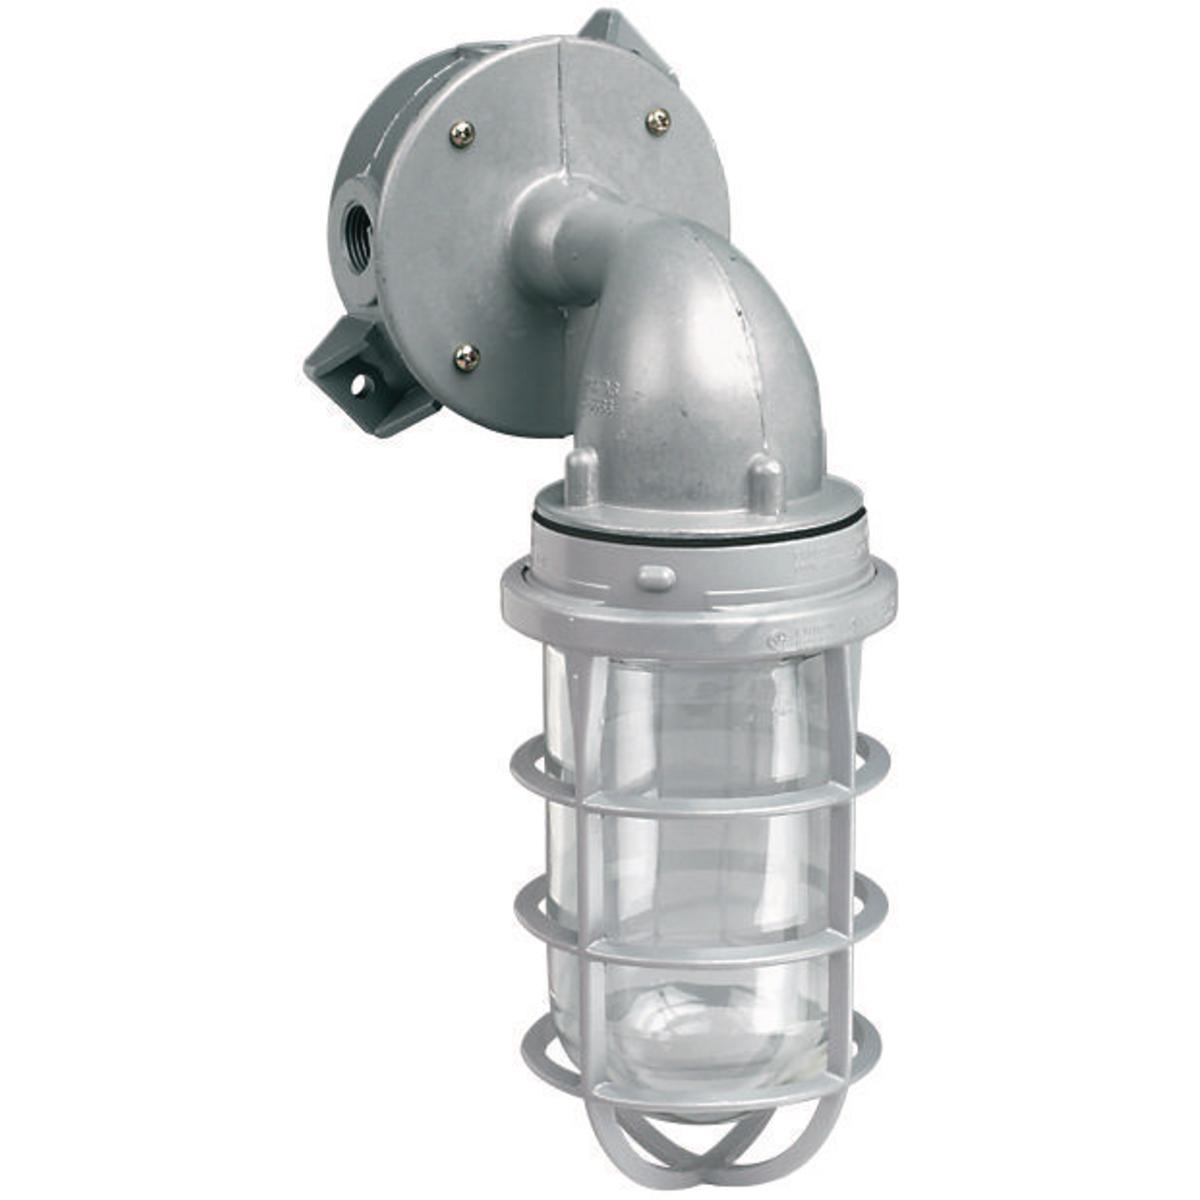 Hubbell VFBG-1-200 200W V Series Incandescent 1/2" Wall Mount to VBC Splice Box  ; Electrostatically applied epoxy/polyester finish ; Modular design ; Hubs are threaded for attachment to conduit ; Set screws in pendant fixture ; Copper-free aluminum (less than .004%) ; The 